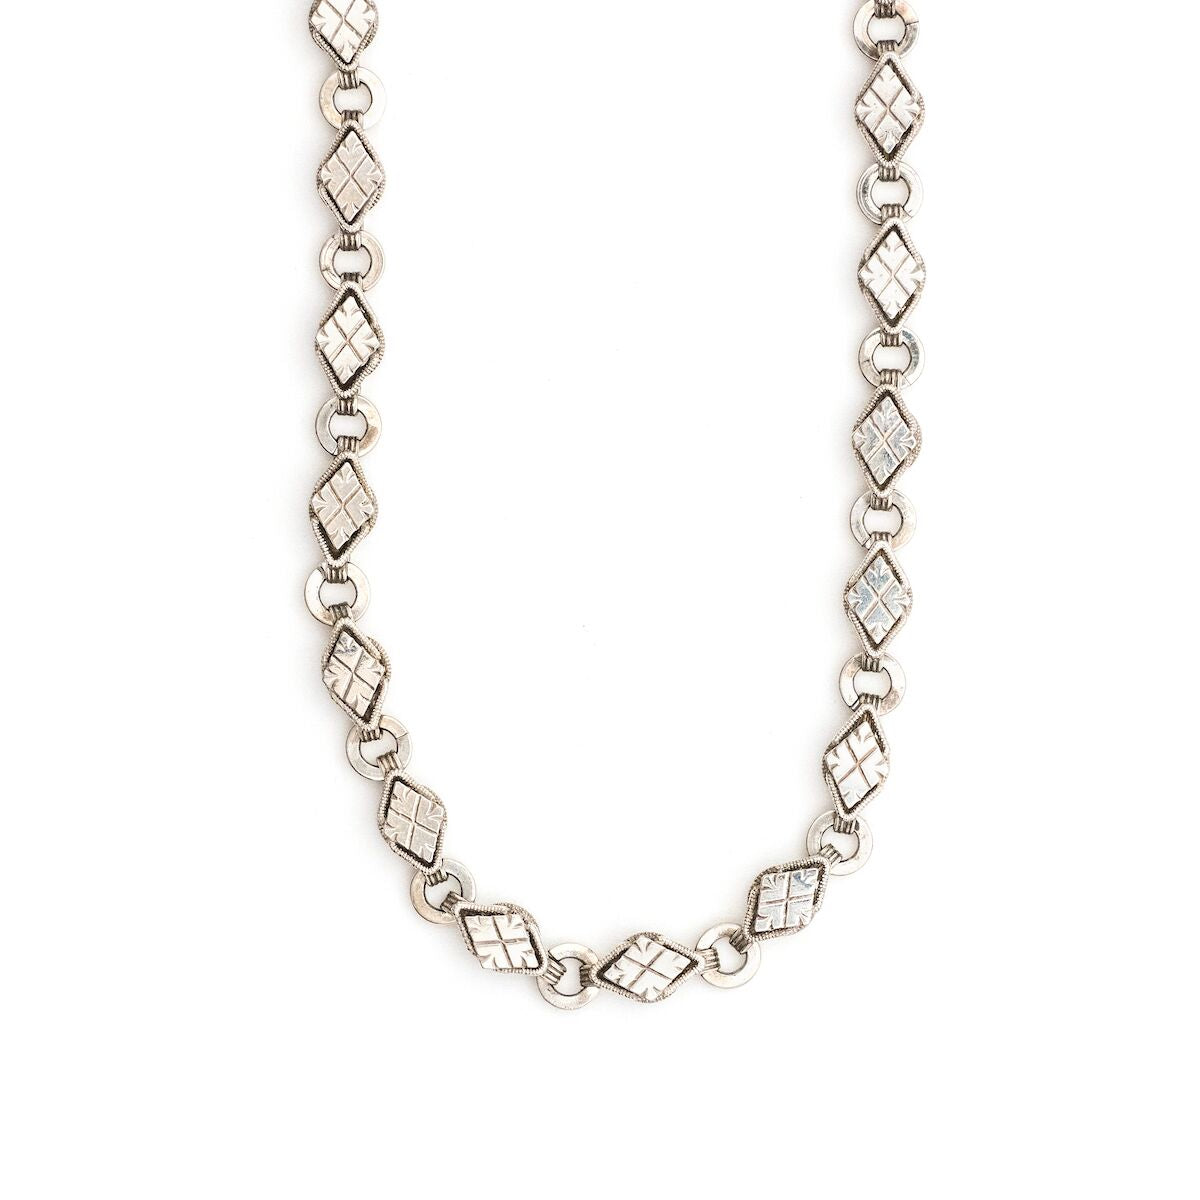 This Victorian-era chain is made of solid sterling silver and features intricately engraved horizontal diamond shapes interspersed with flat circular rings. Paired with a silver or silver and gold locket, this chain instantly makes a necklace more bold and eye-catching.  Full chain view